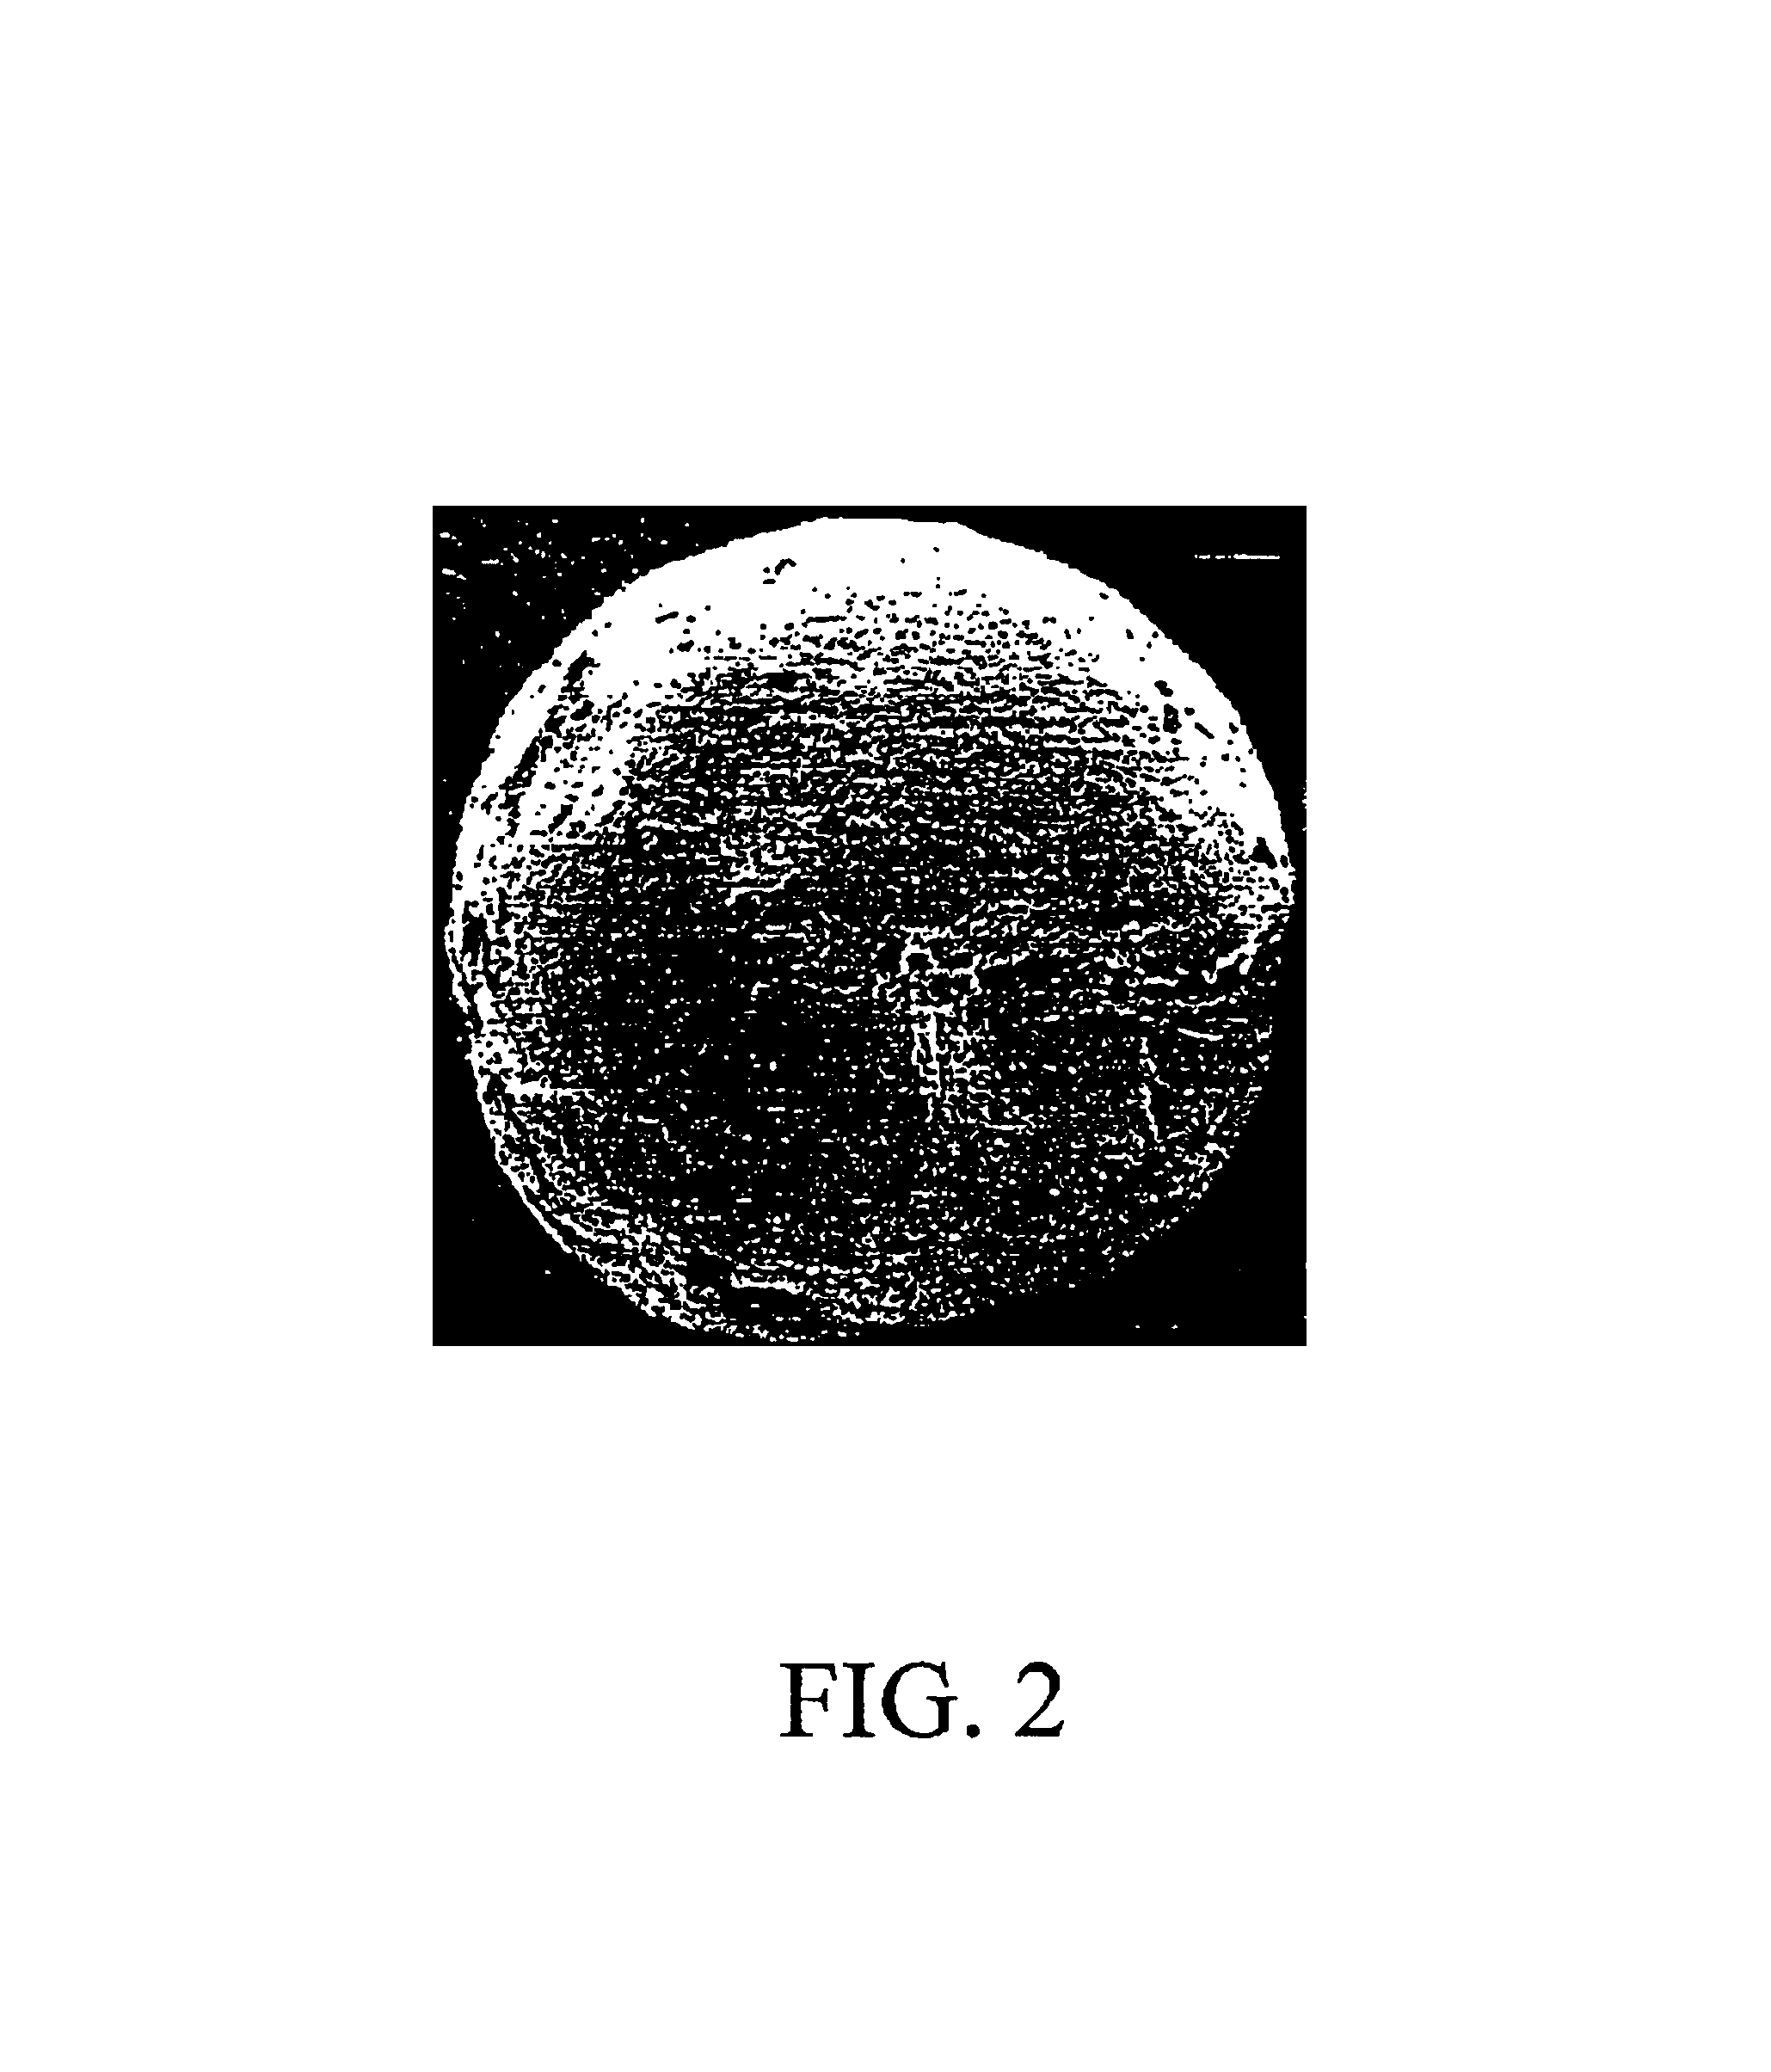 Process for producing granules for supporting surfactant